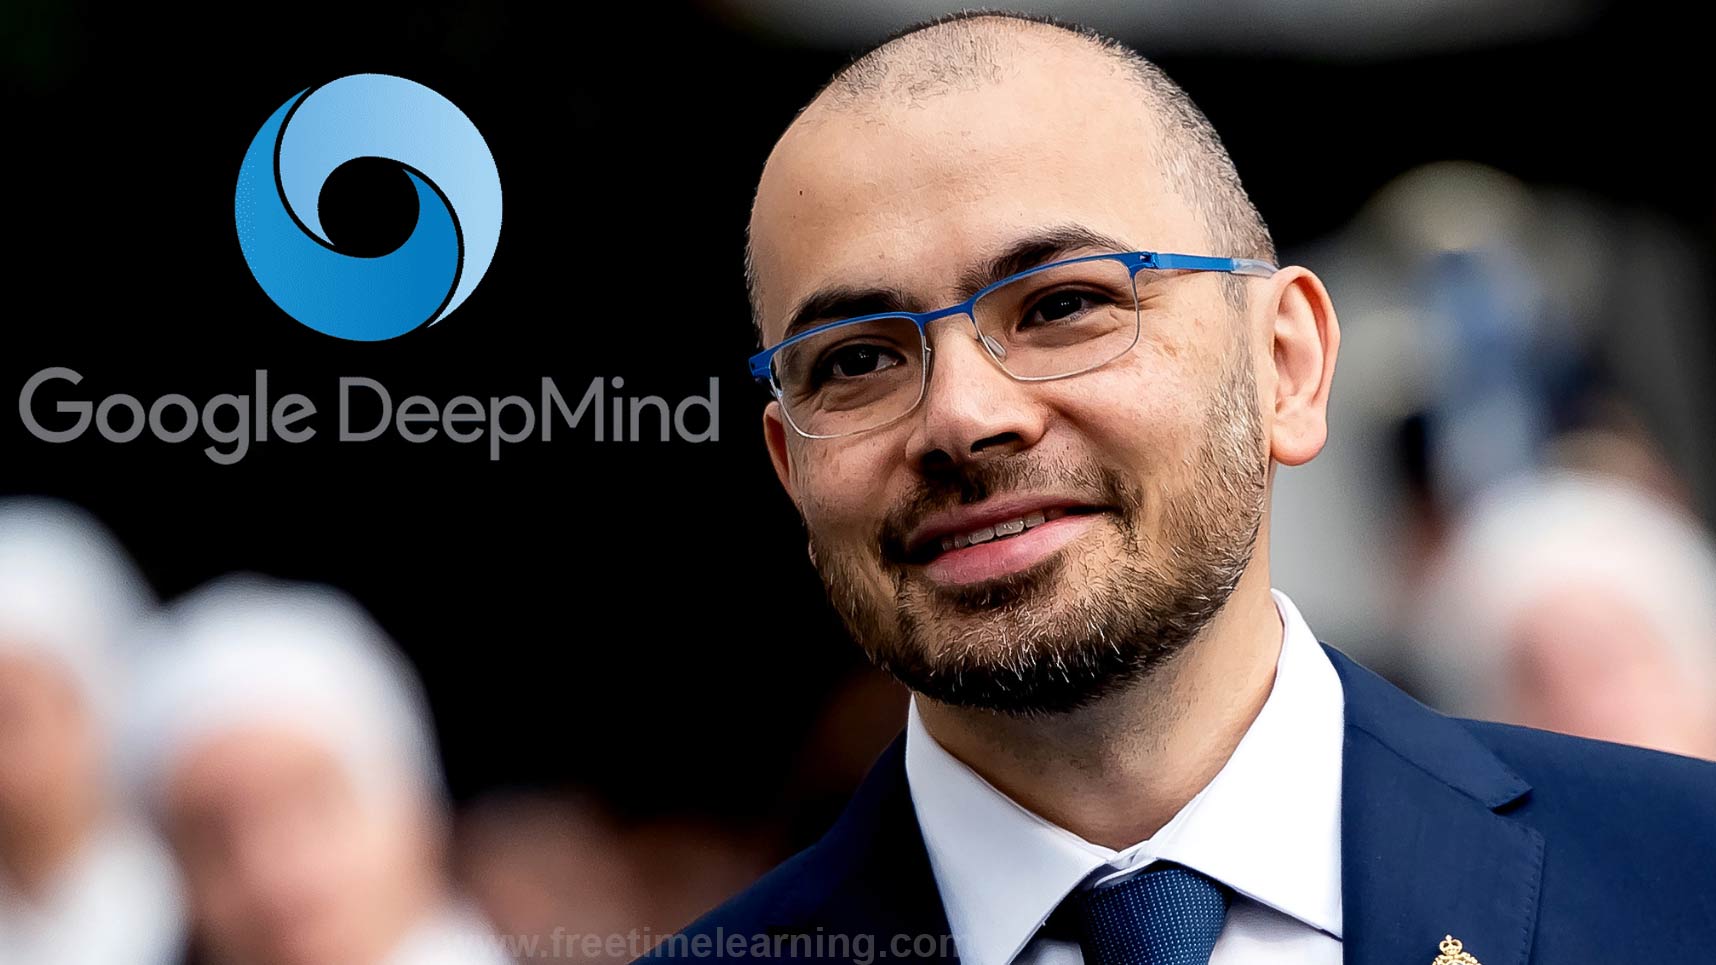 Google DeepMind's CEO Says 'Gemini' will be more capable than OpenAI's ChatGPT